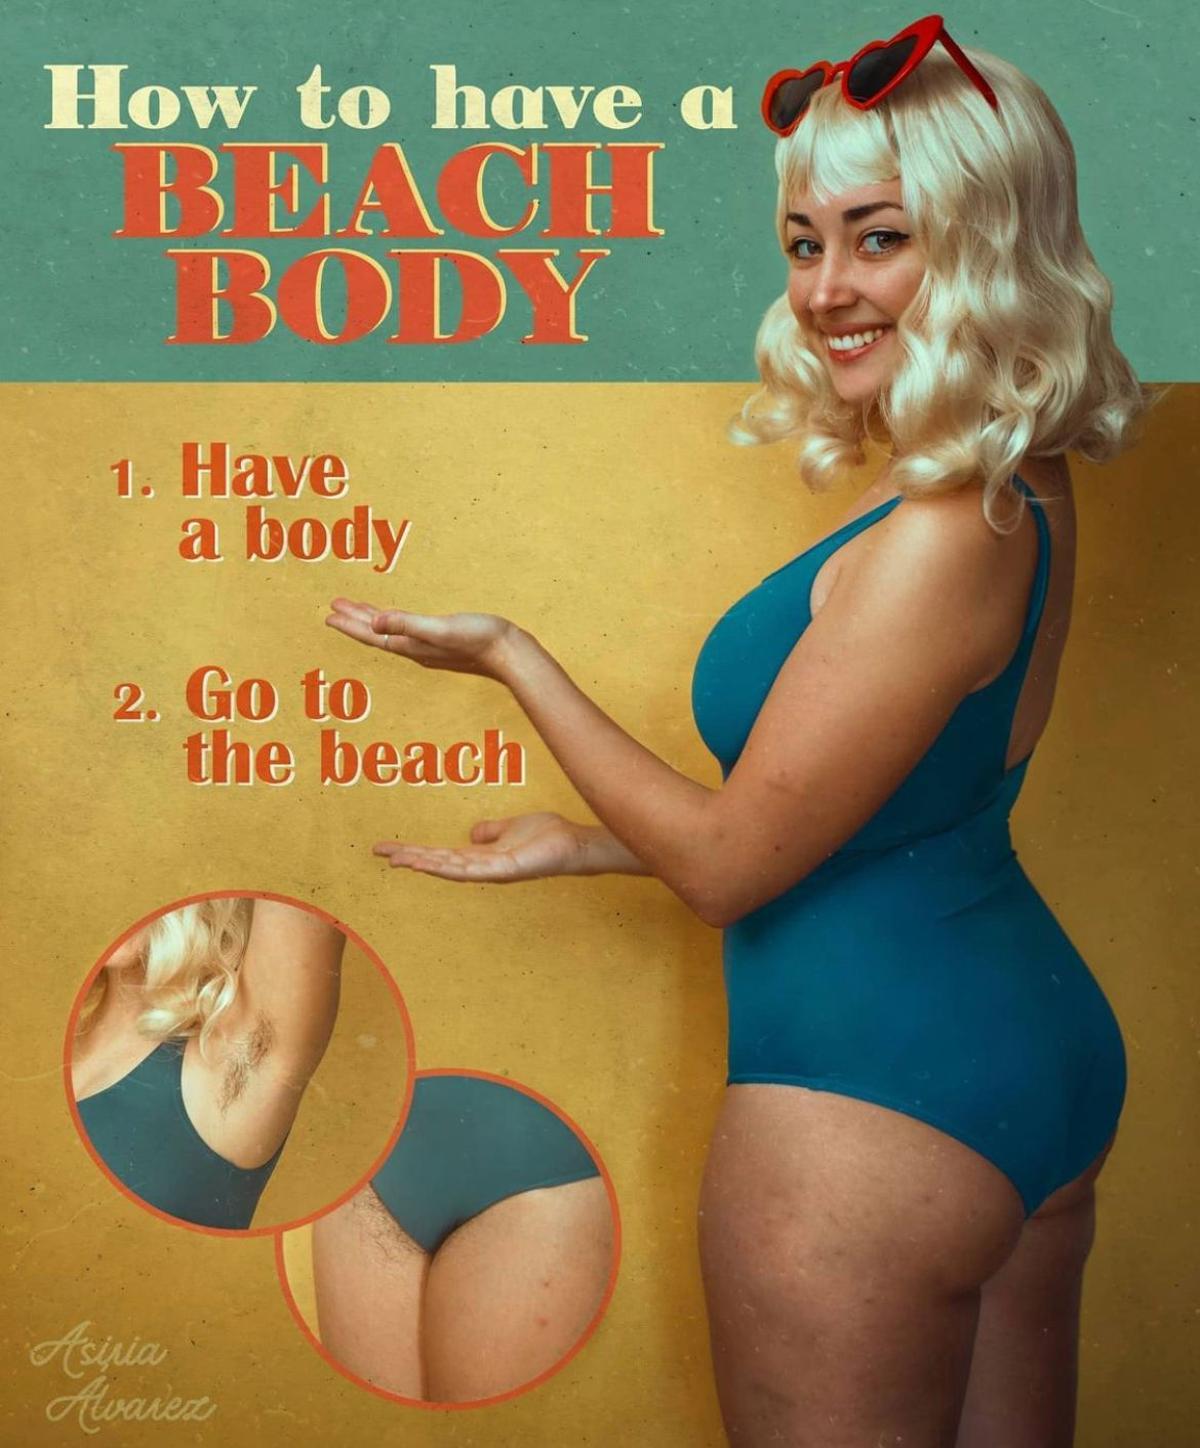 How to have a beach body.